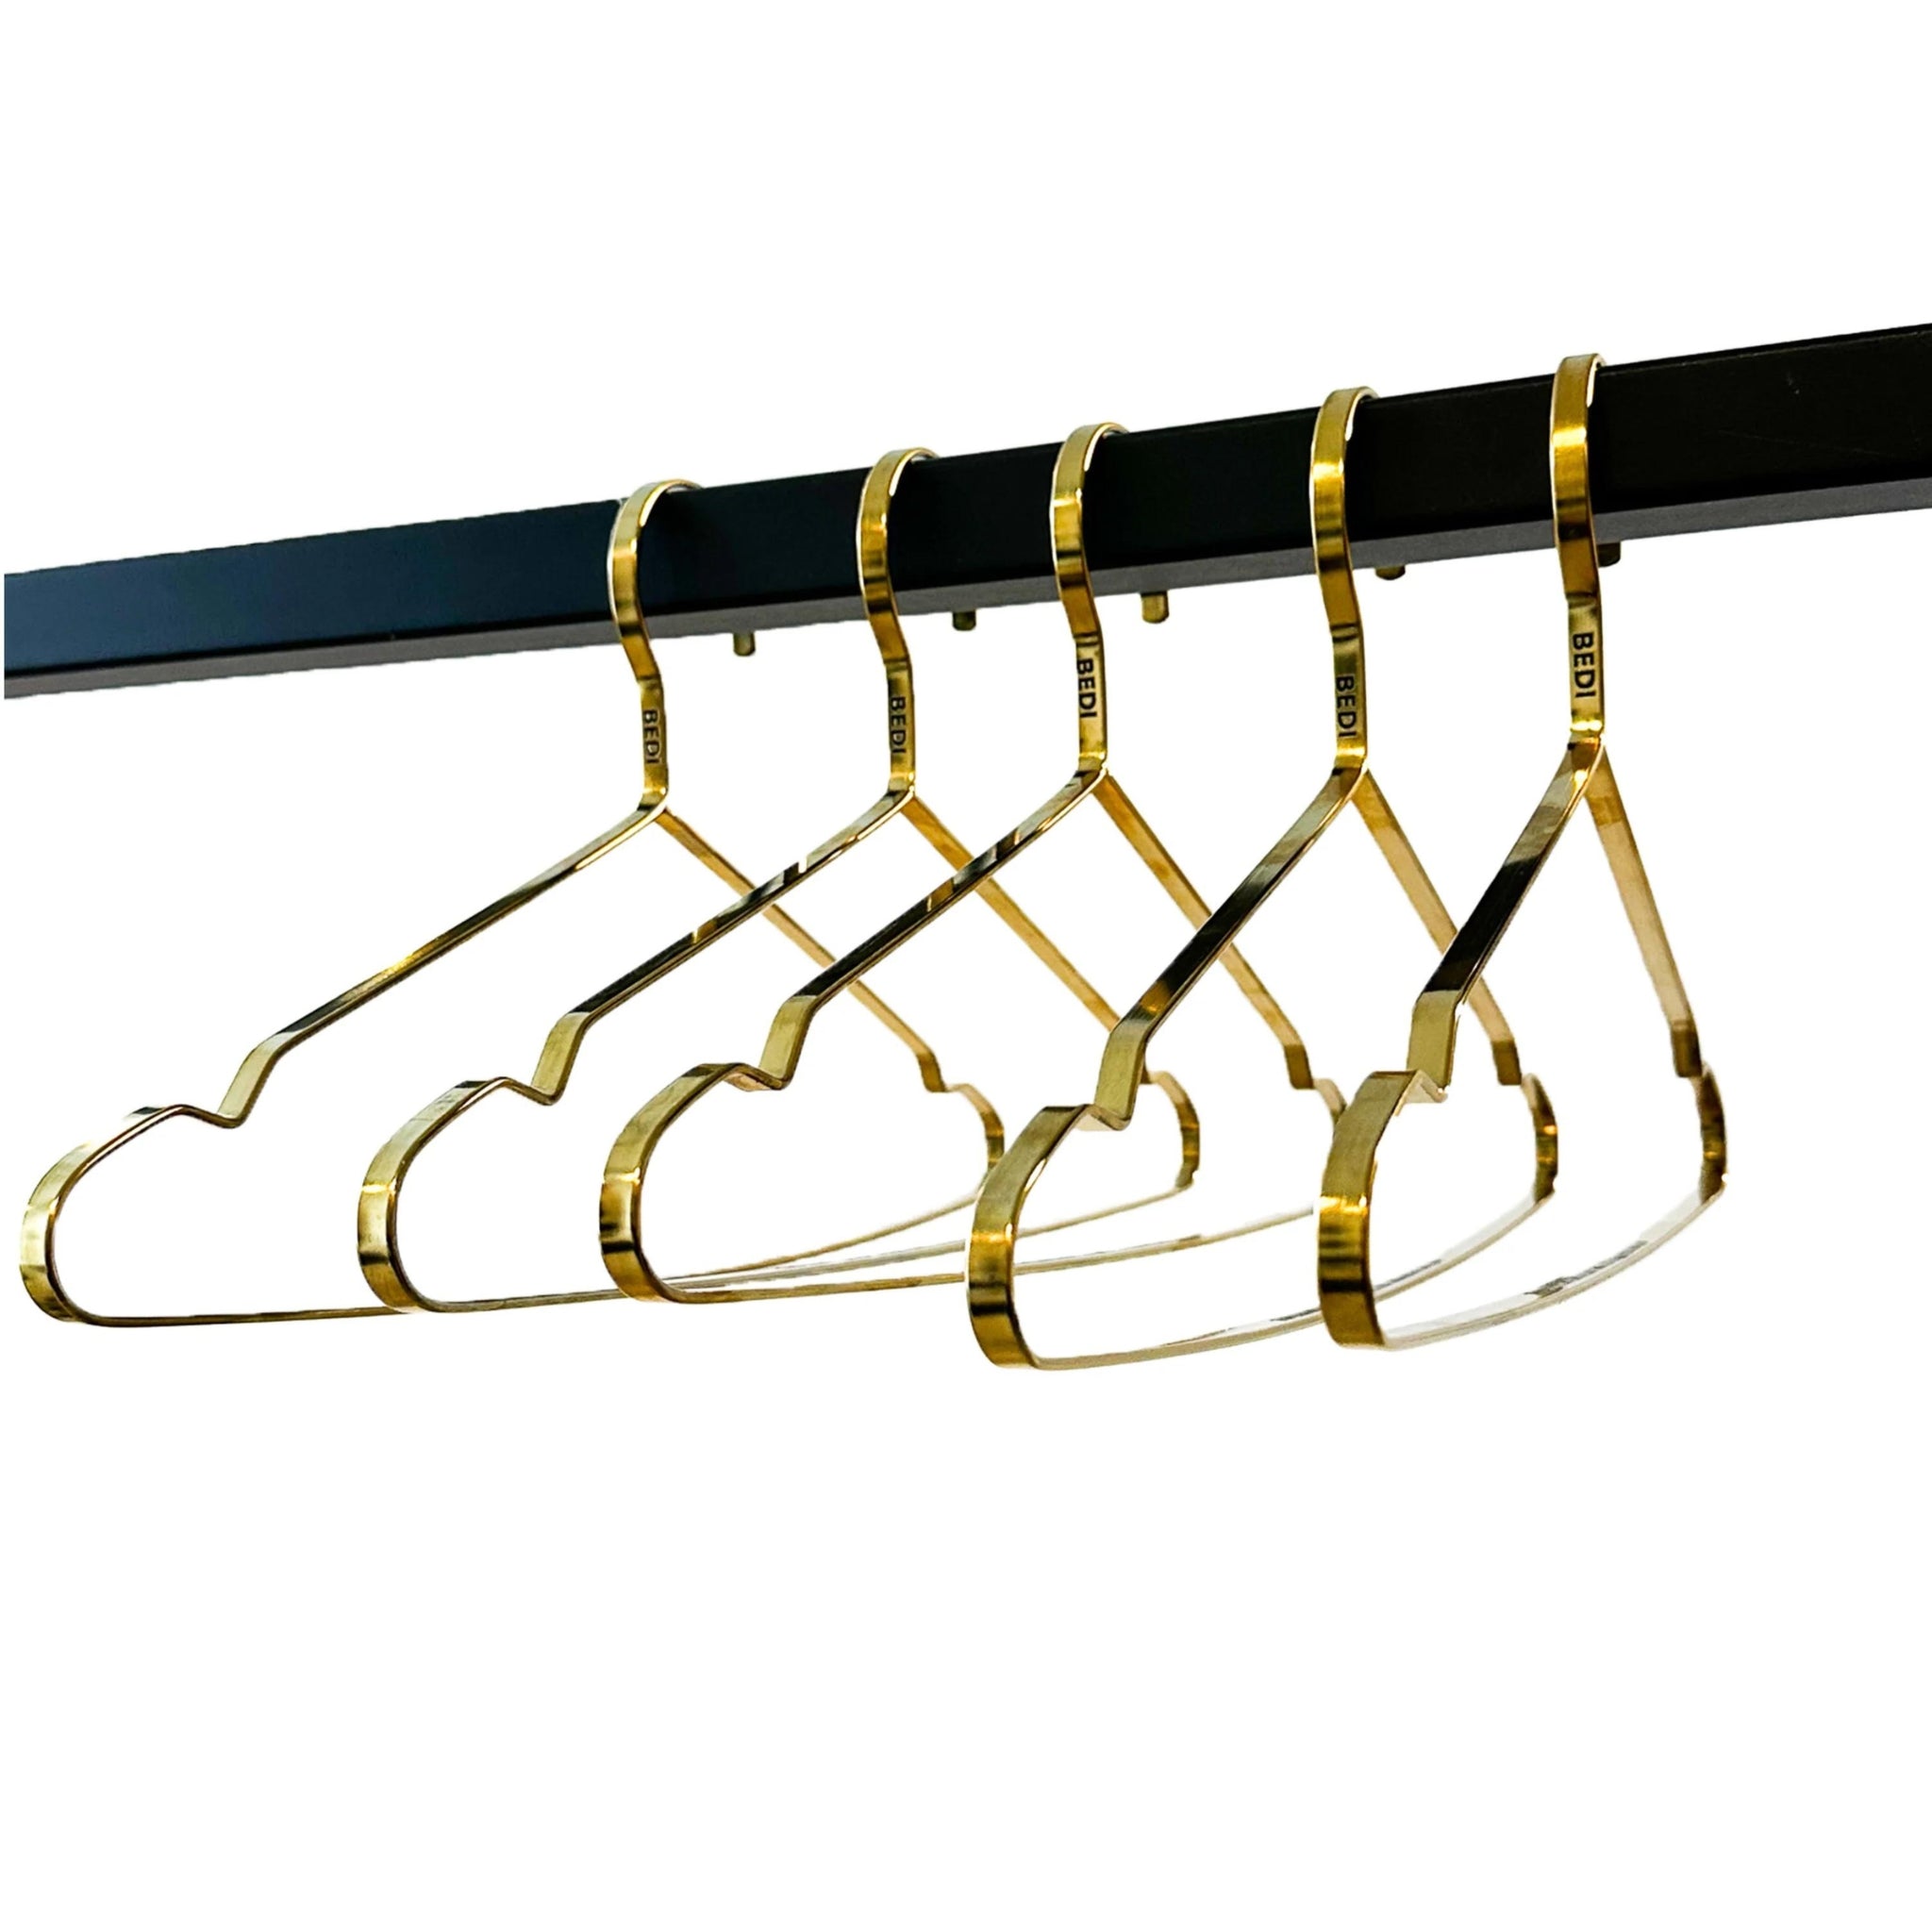 side view of five brass engraved hanger on a white background